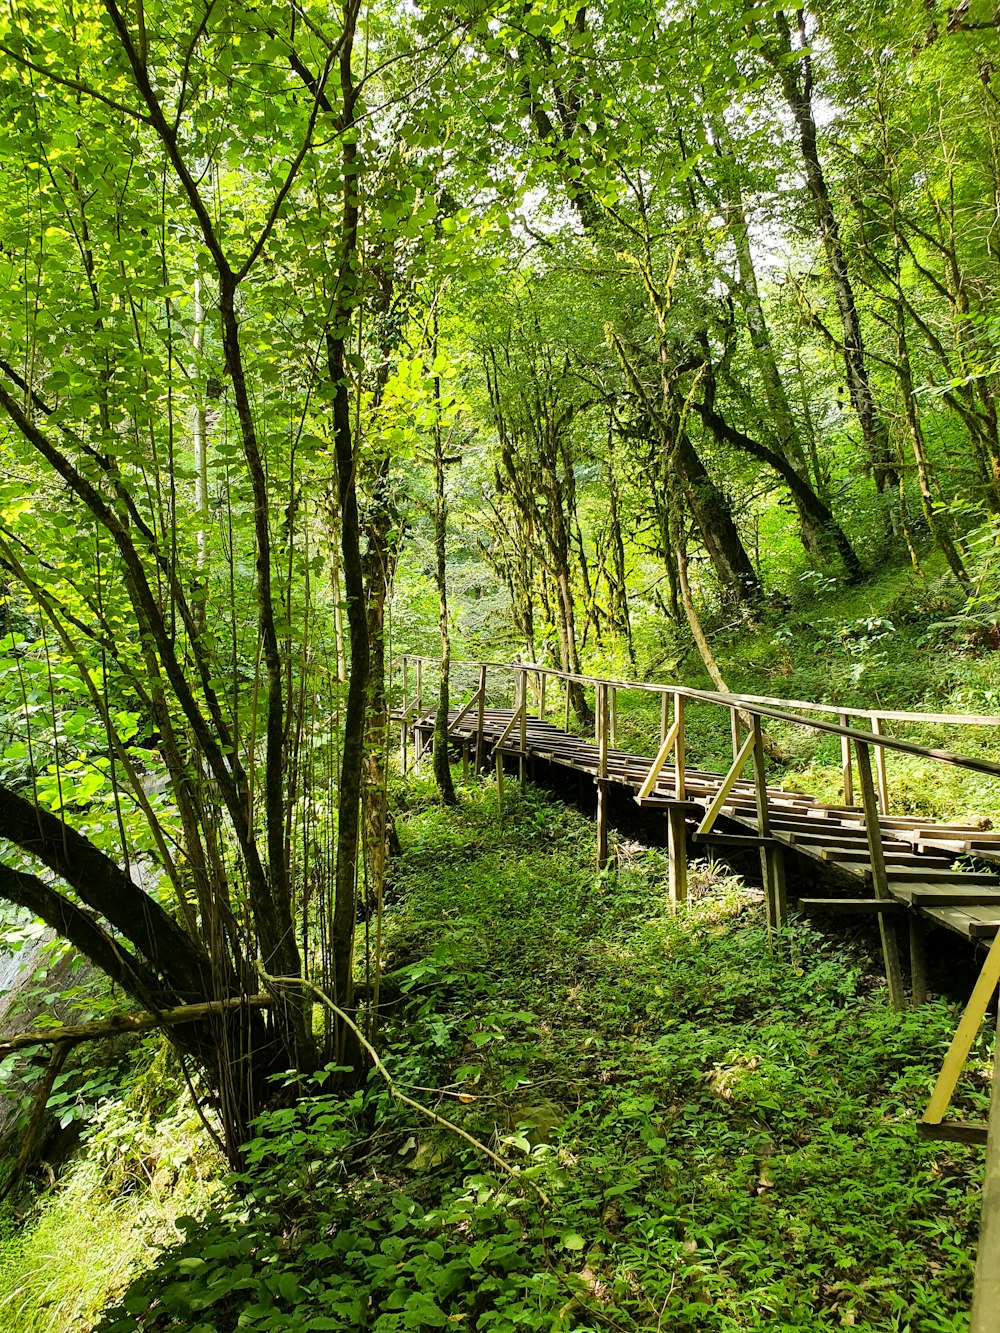 a wooden bridge in the middle of a lush green forest